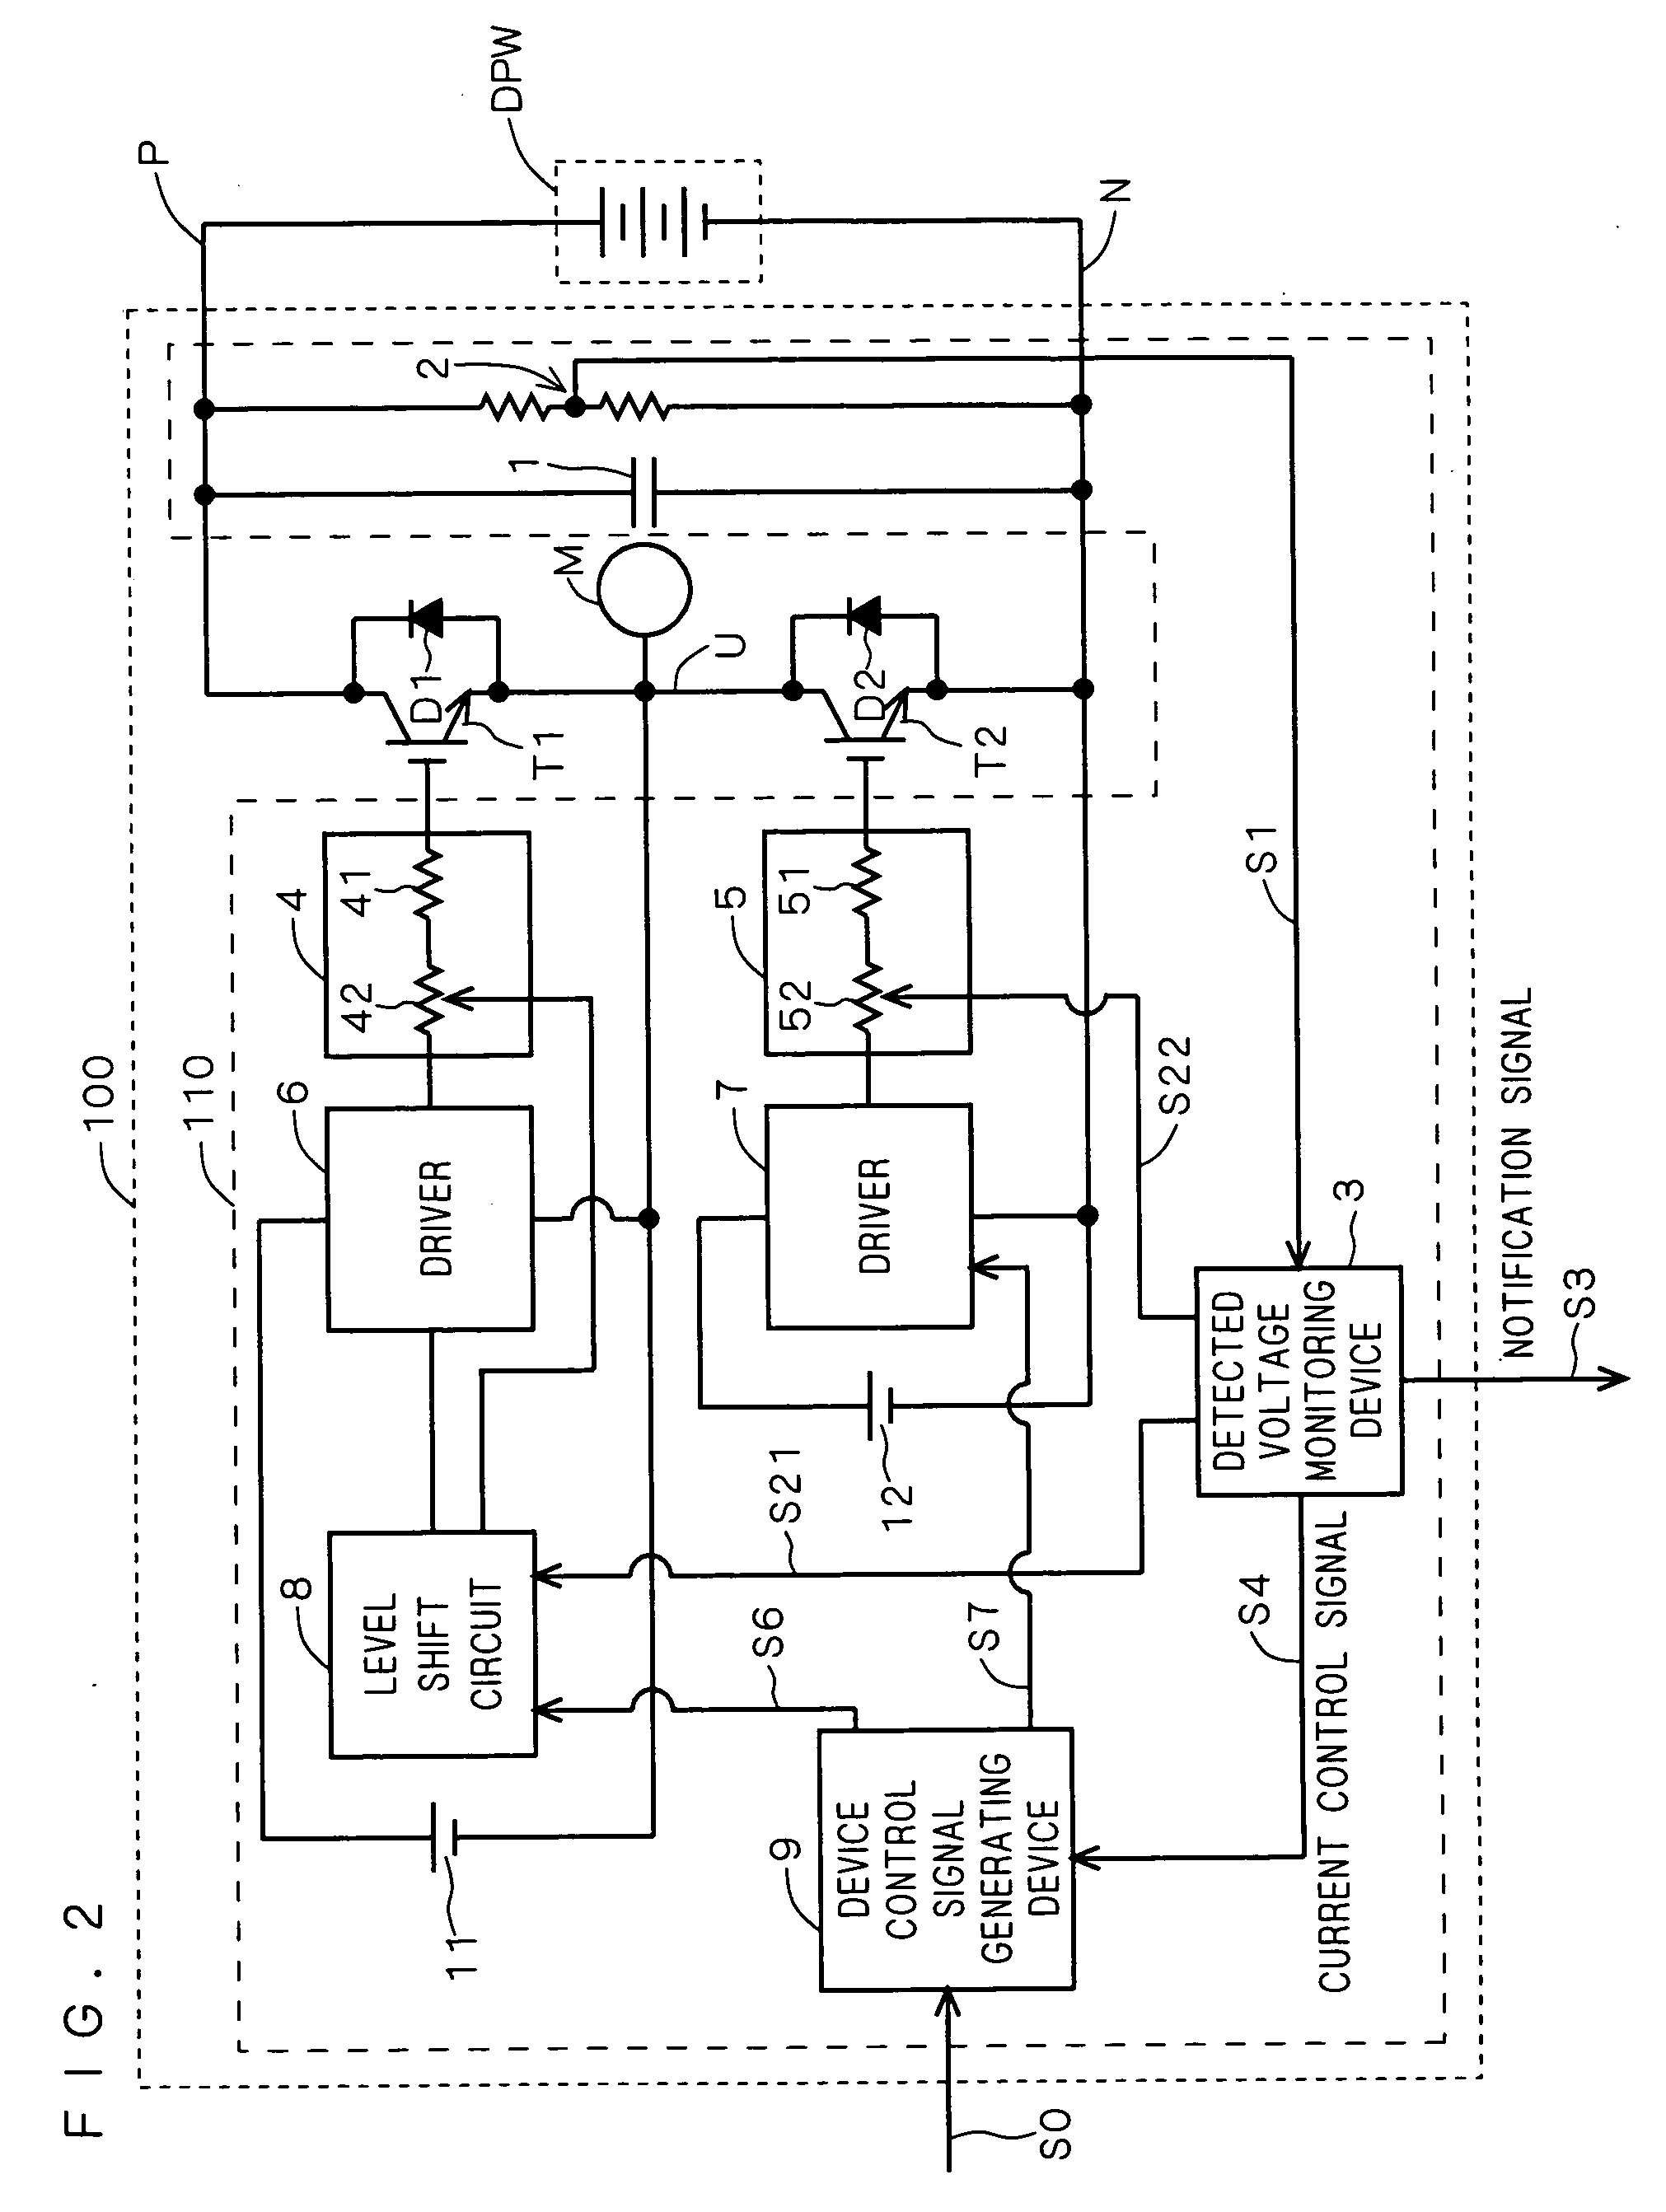 Control device of switching device and control device of driving circuit of motor